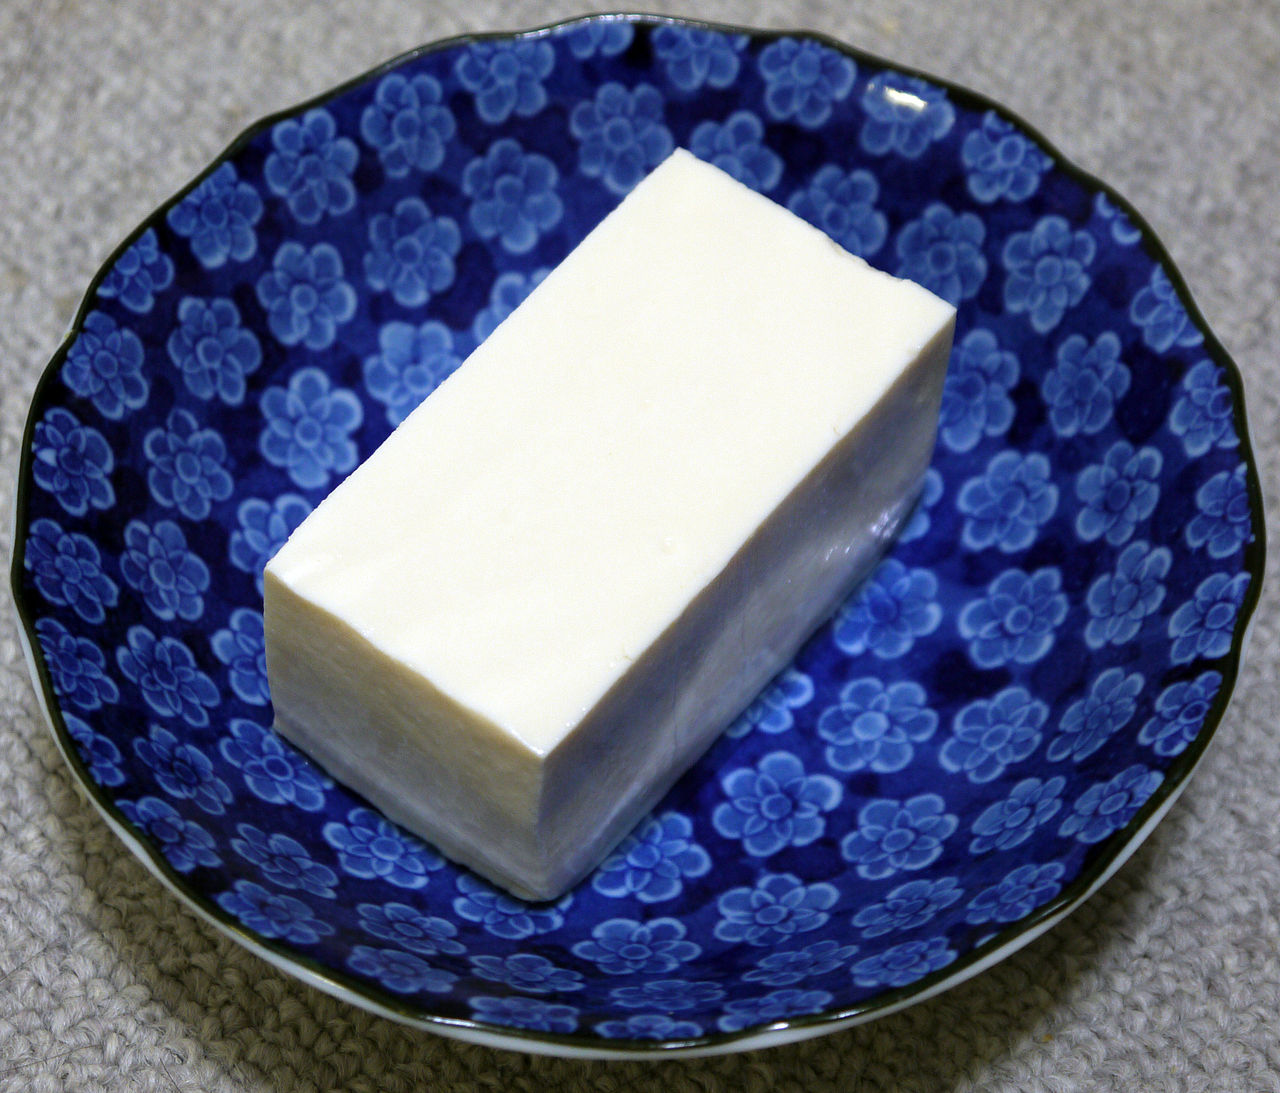 the image of a piece of tofu